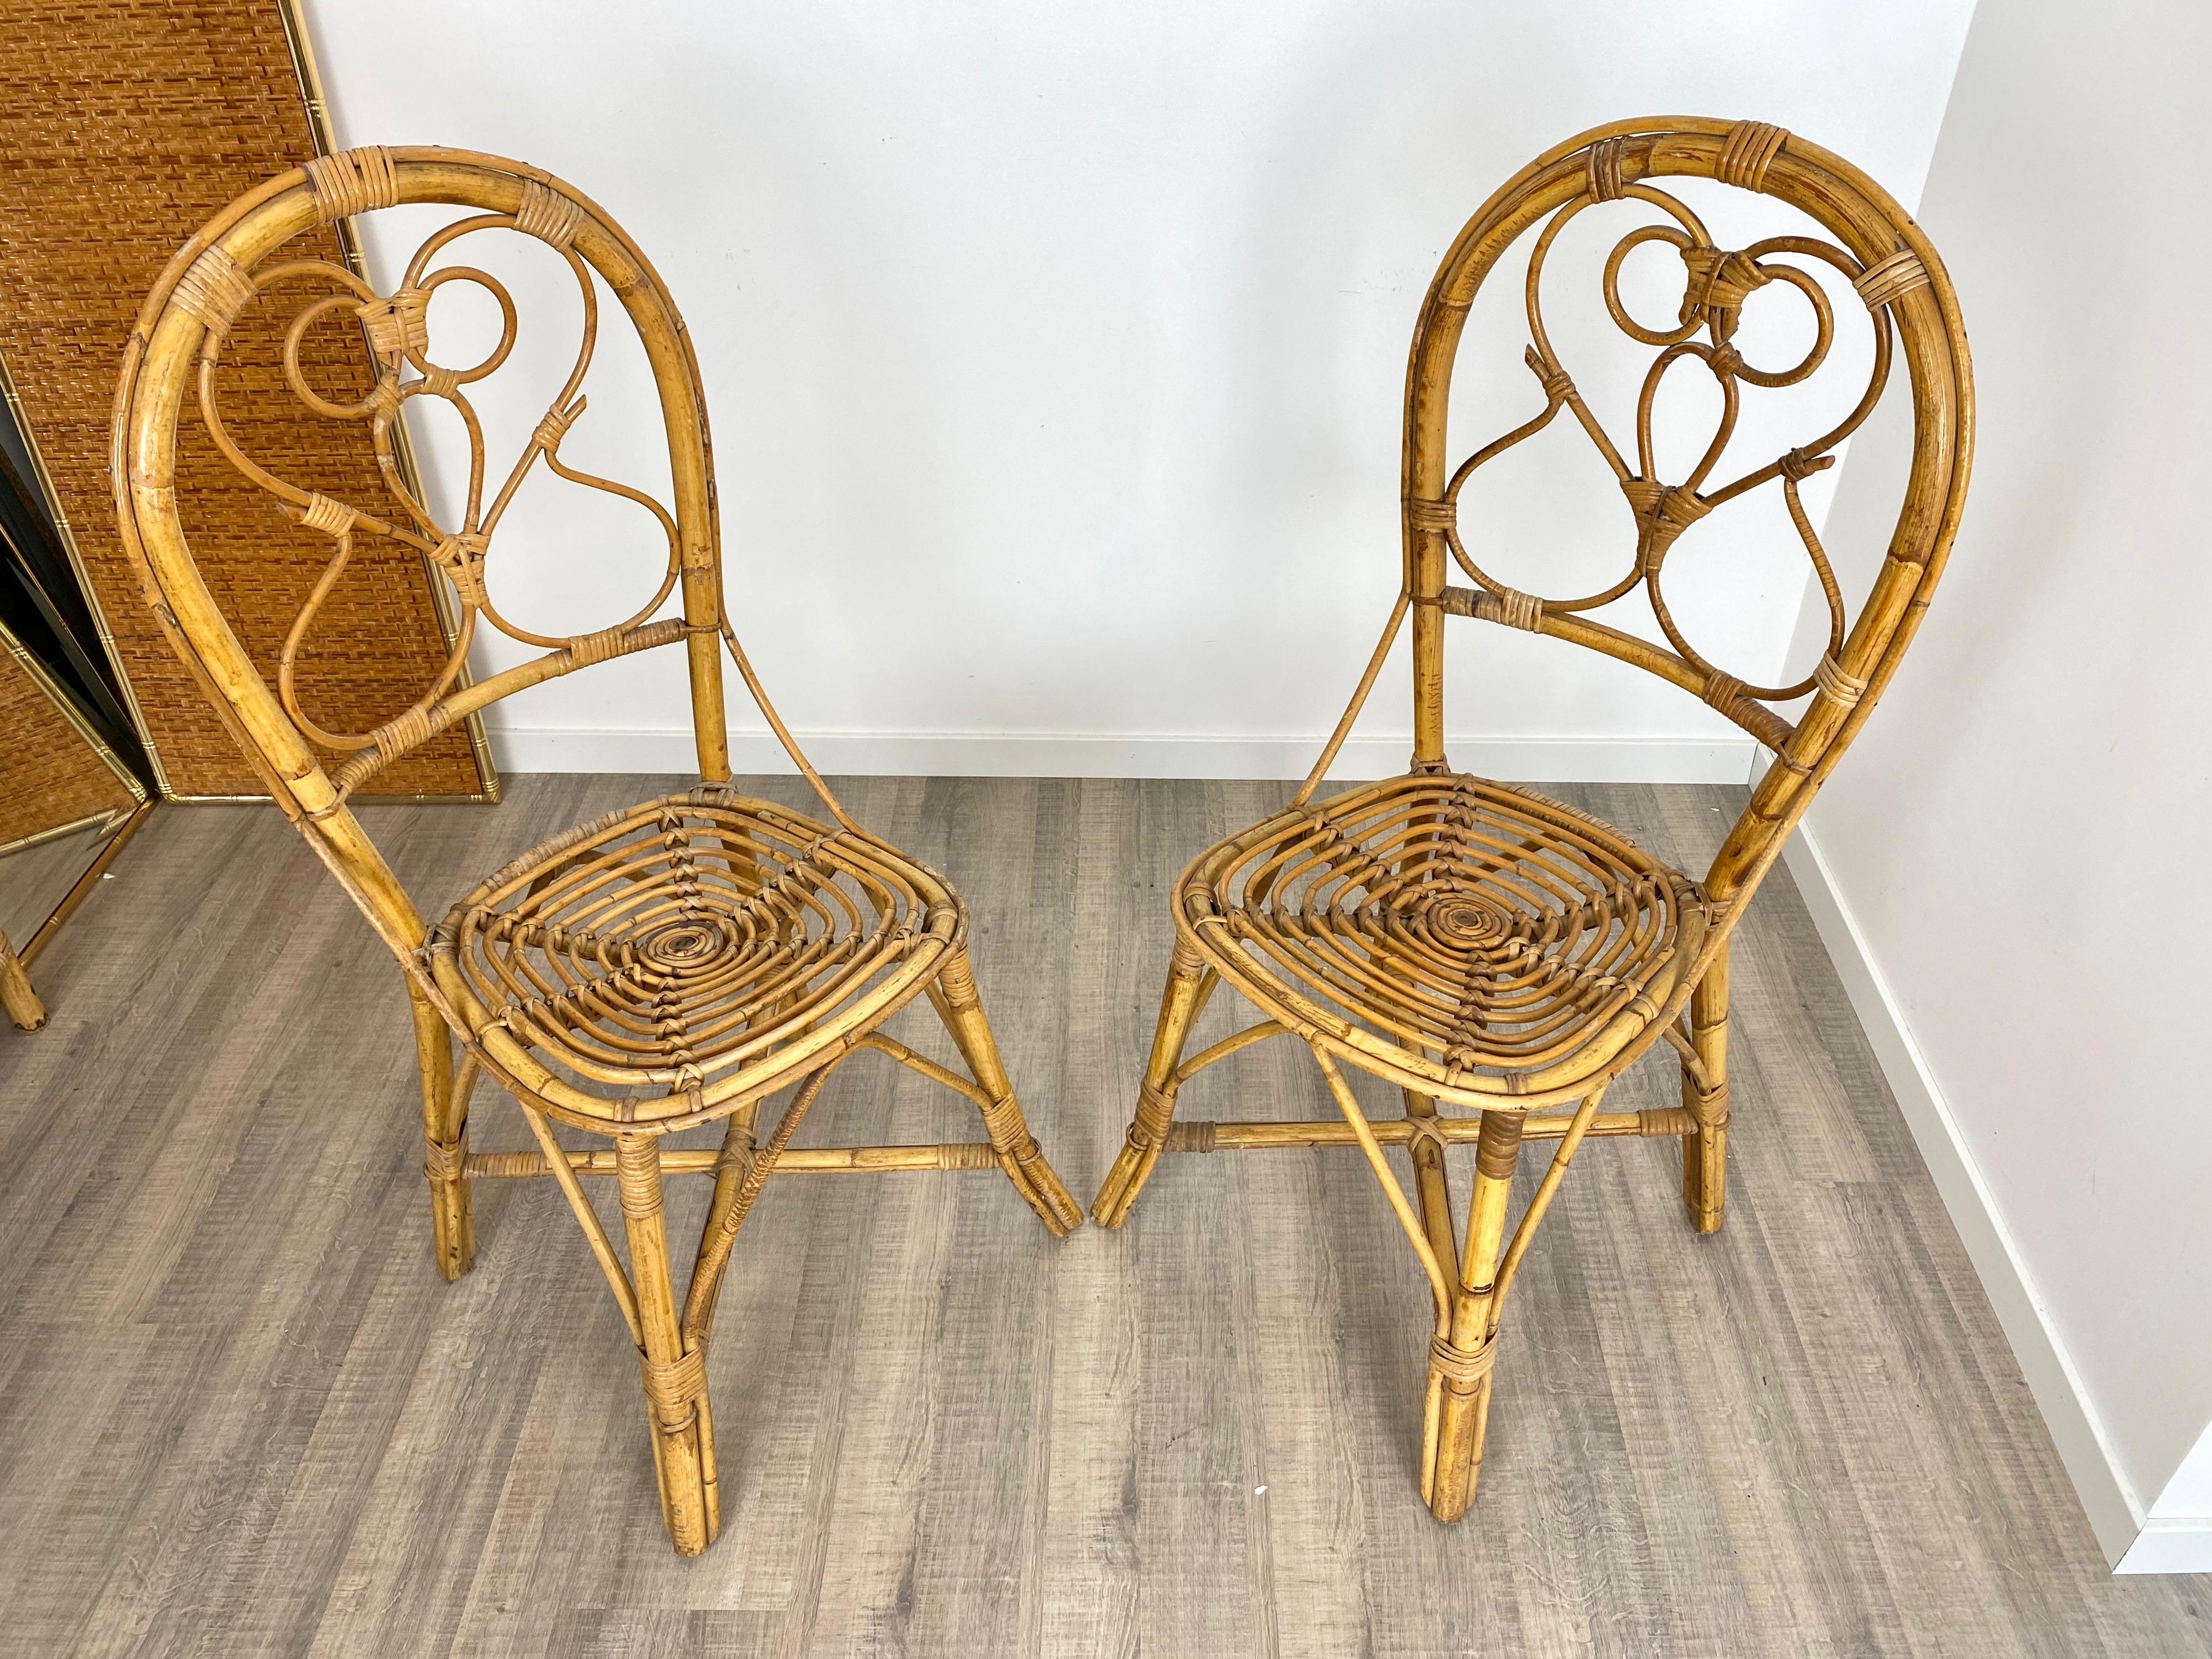 Six Chairs Rattan and Bamboo, Italy, 1960s For Sale 4